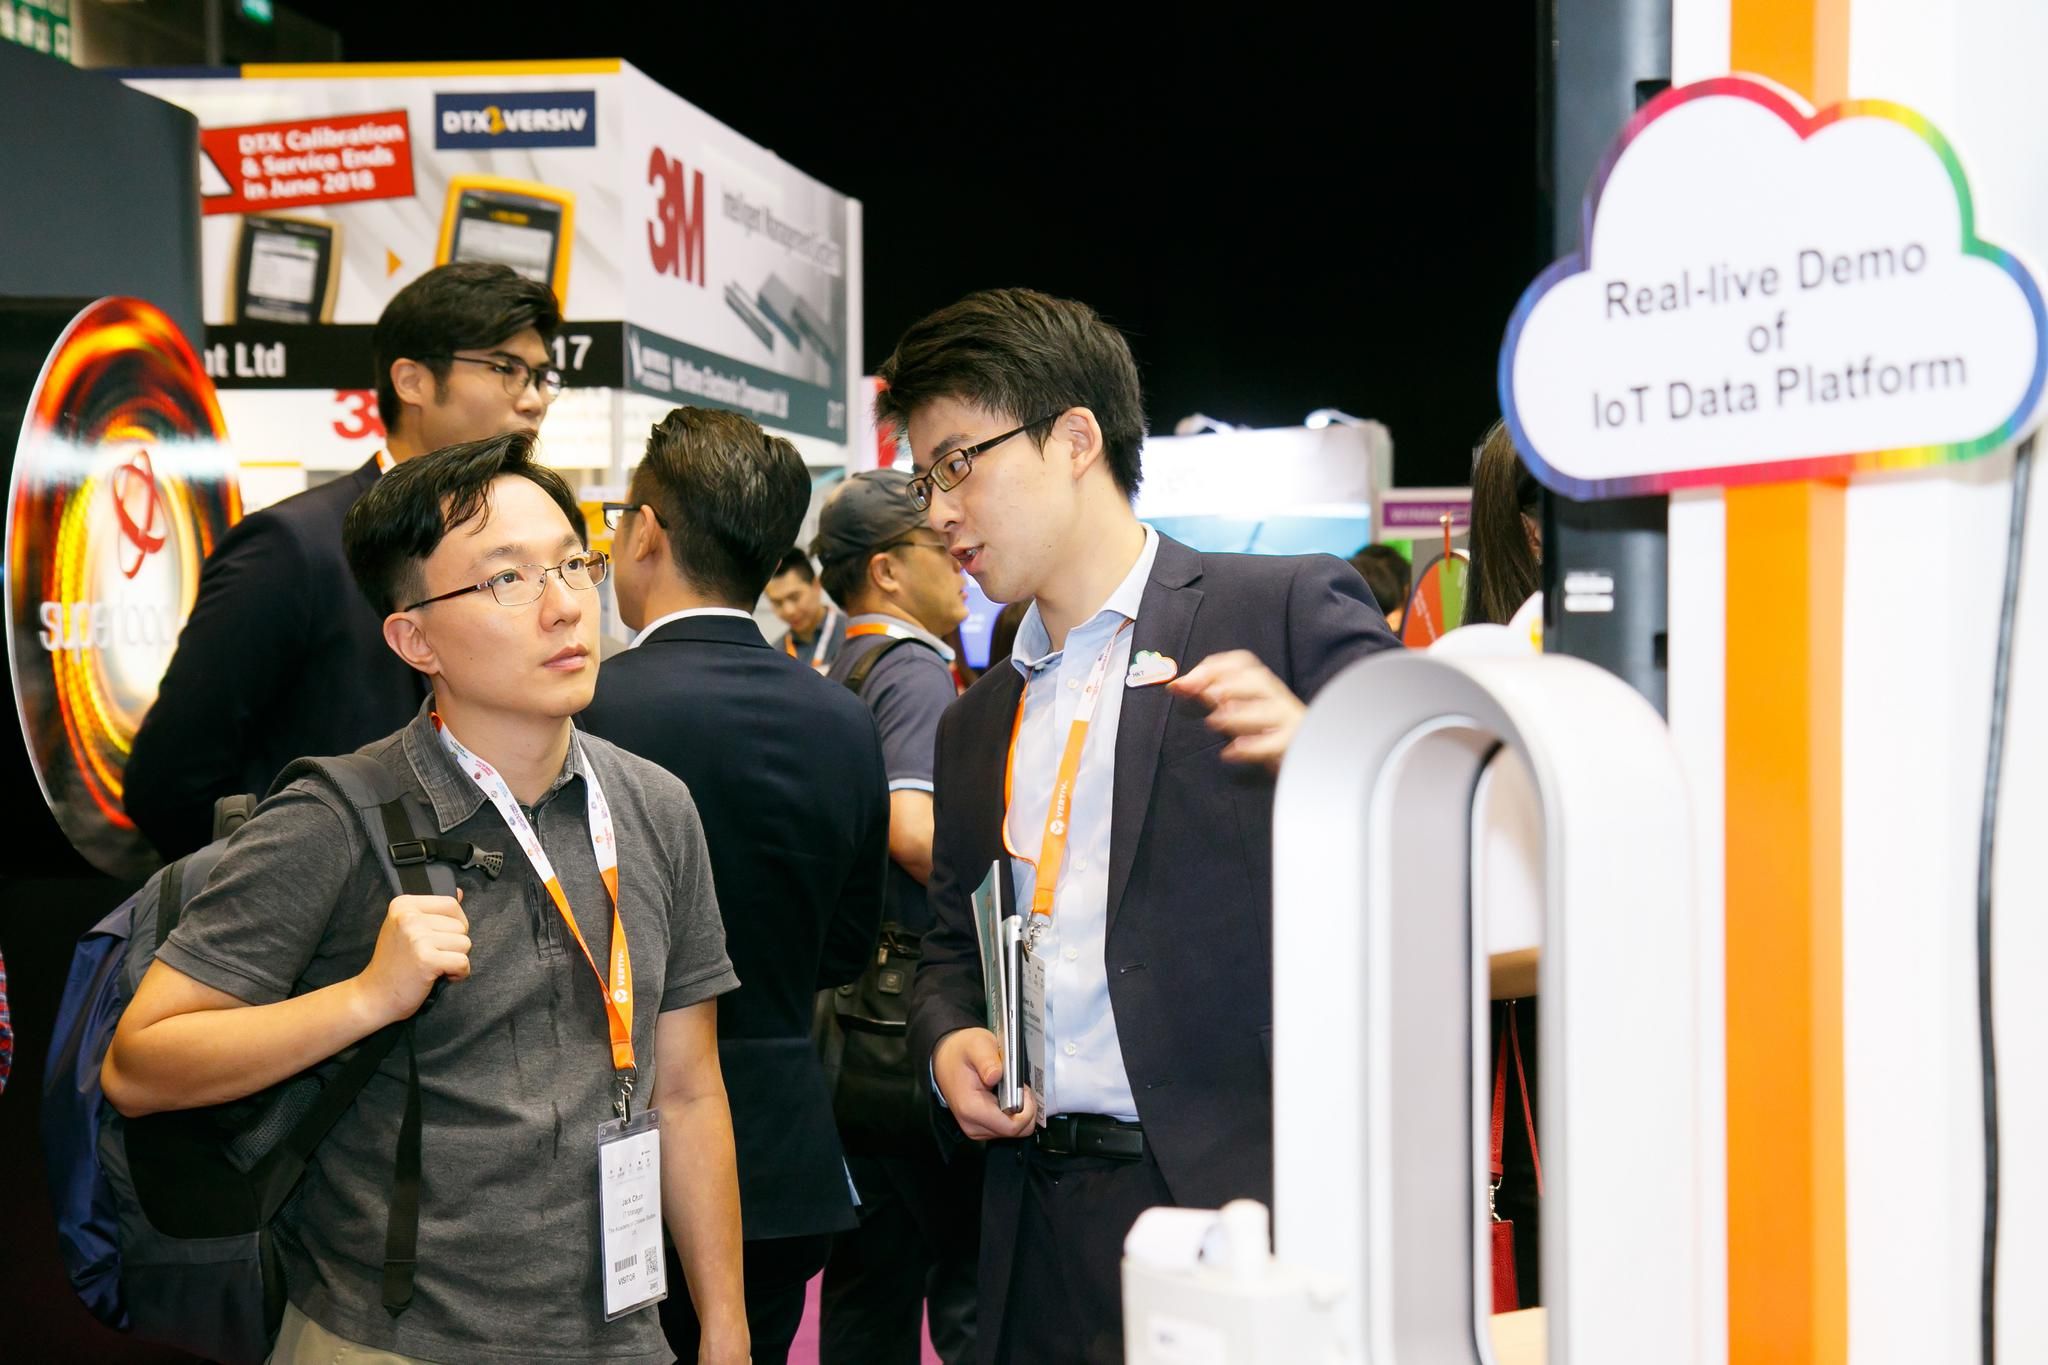 Cloud Expo Asia and Data Centre World, Hong Kong, returns for its fourth edition with a leading exhibitor line-up – Alibaba Cloud, HUAWEI CLOUD, Google Cloud, Vertiv, CLP, Sophos, Blackberry and more.